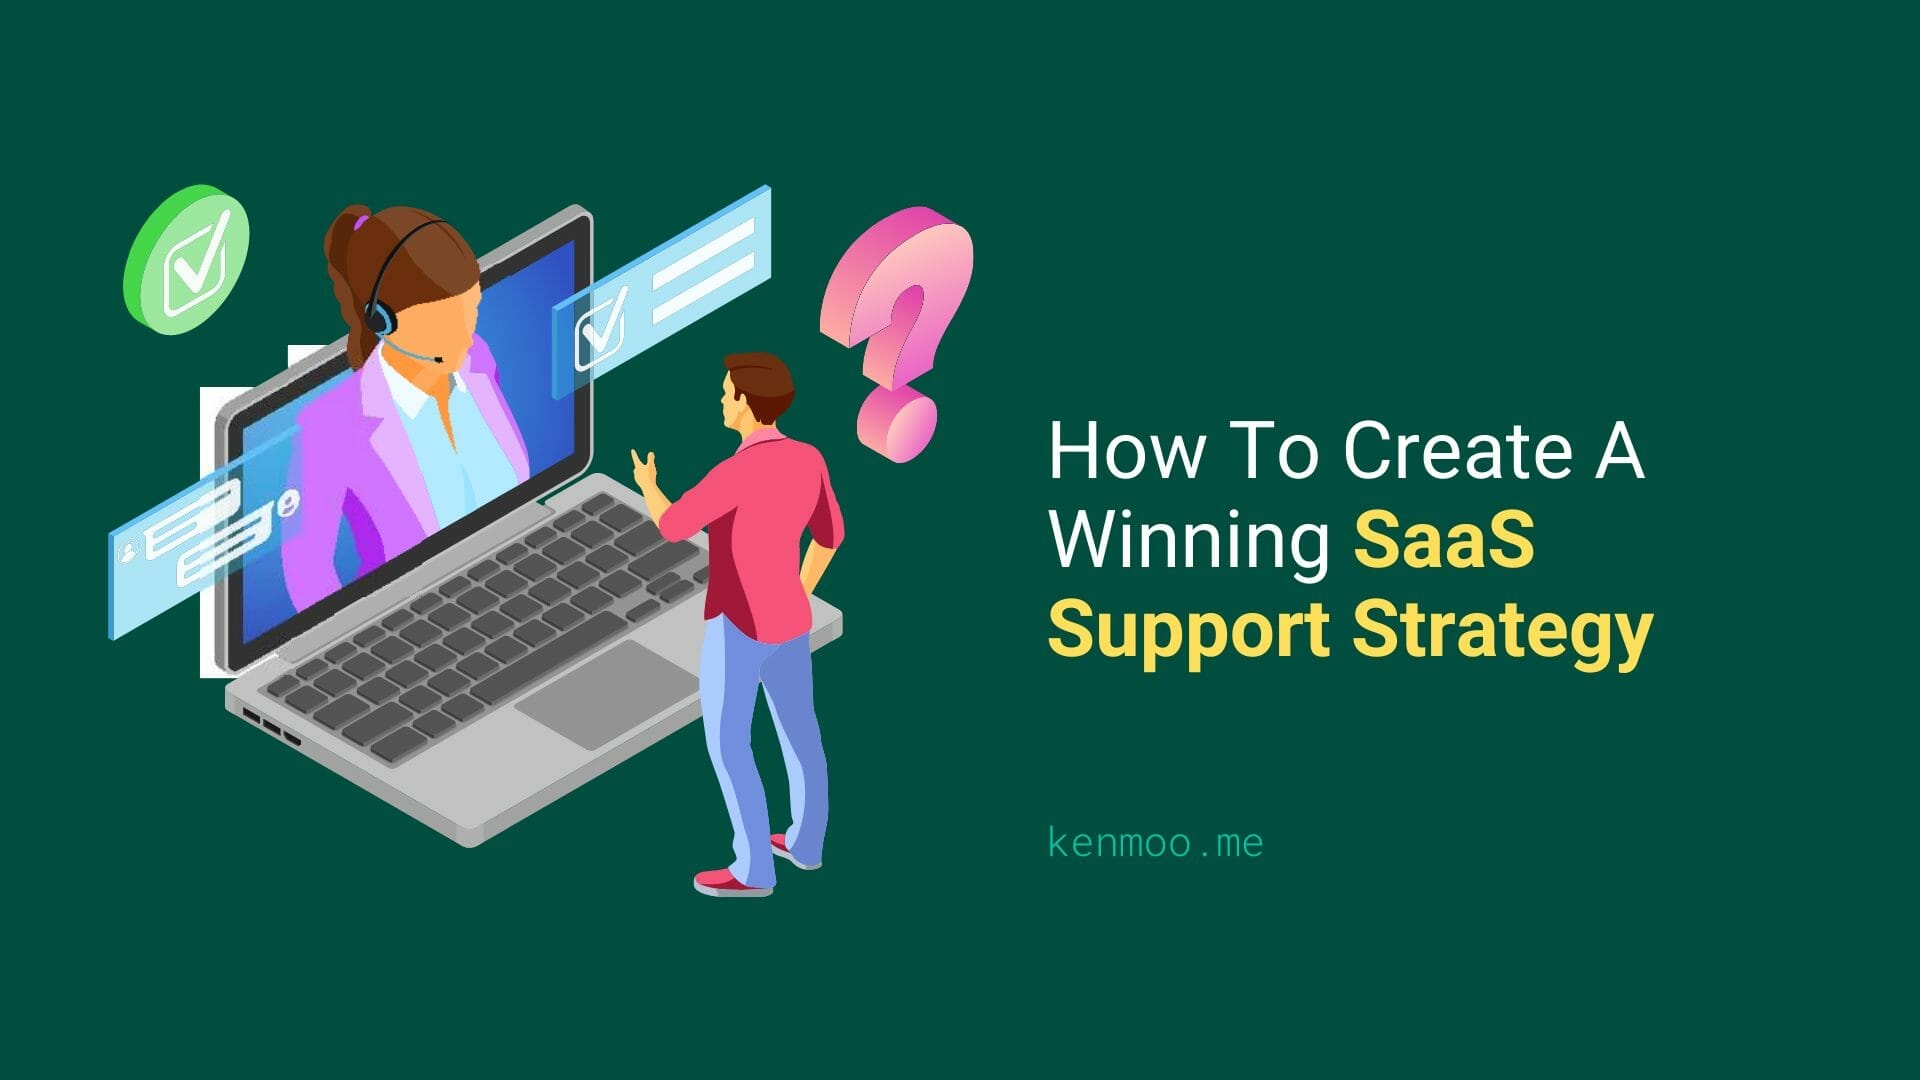 How To Create A Winning SaaS Support Strategy